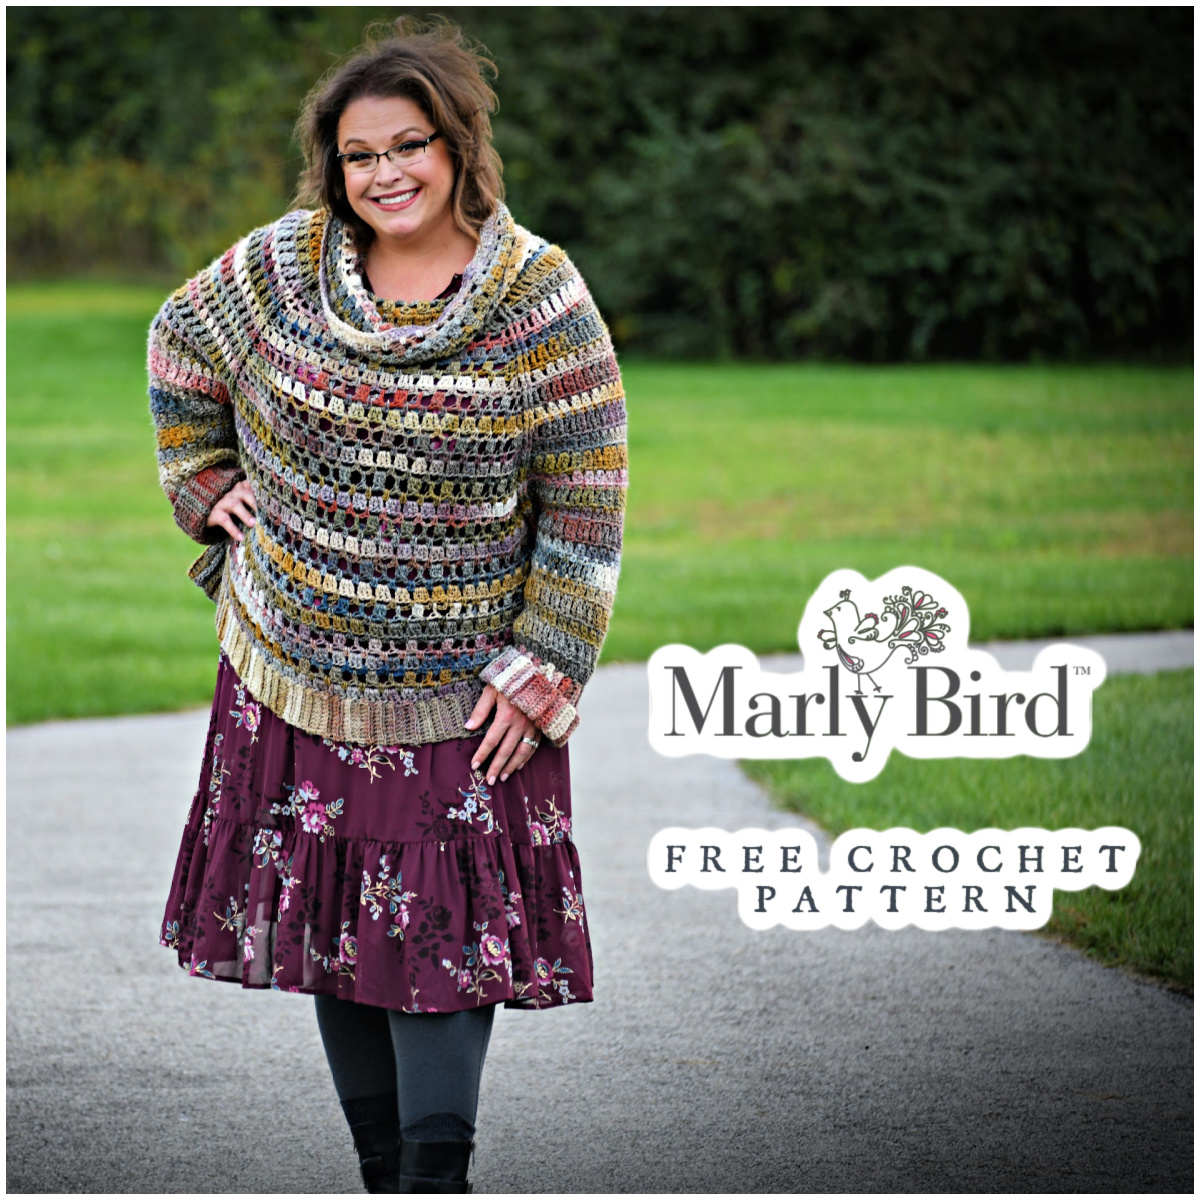 A woman stands outdoors smiling, wearing a colorful crochet swancho and floral skirt, with a logo that reads "marly bird free crochet pattern" in the corner. -Marly Bird